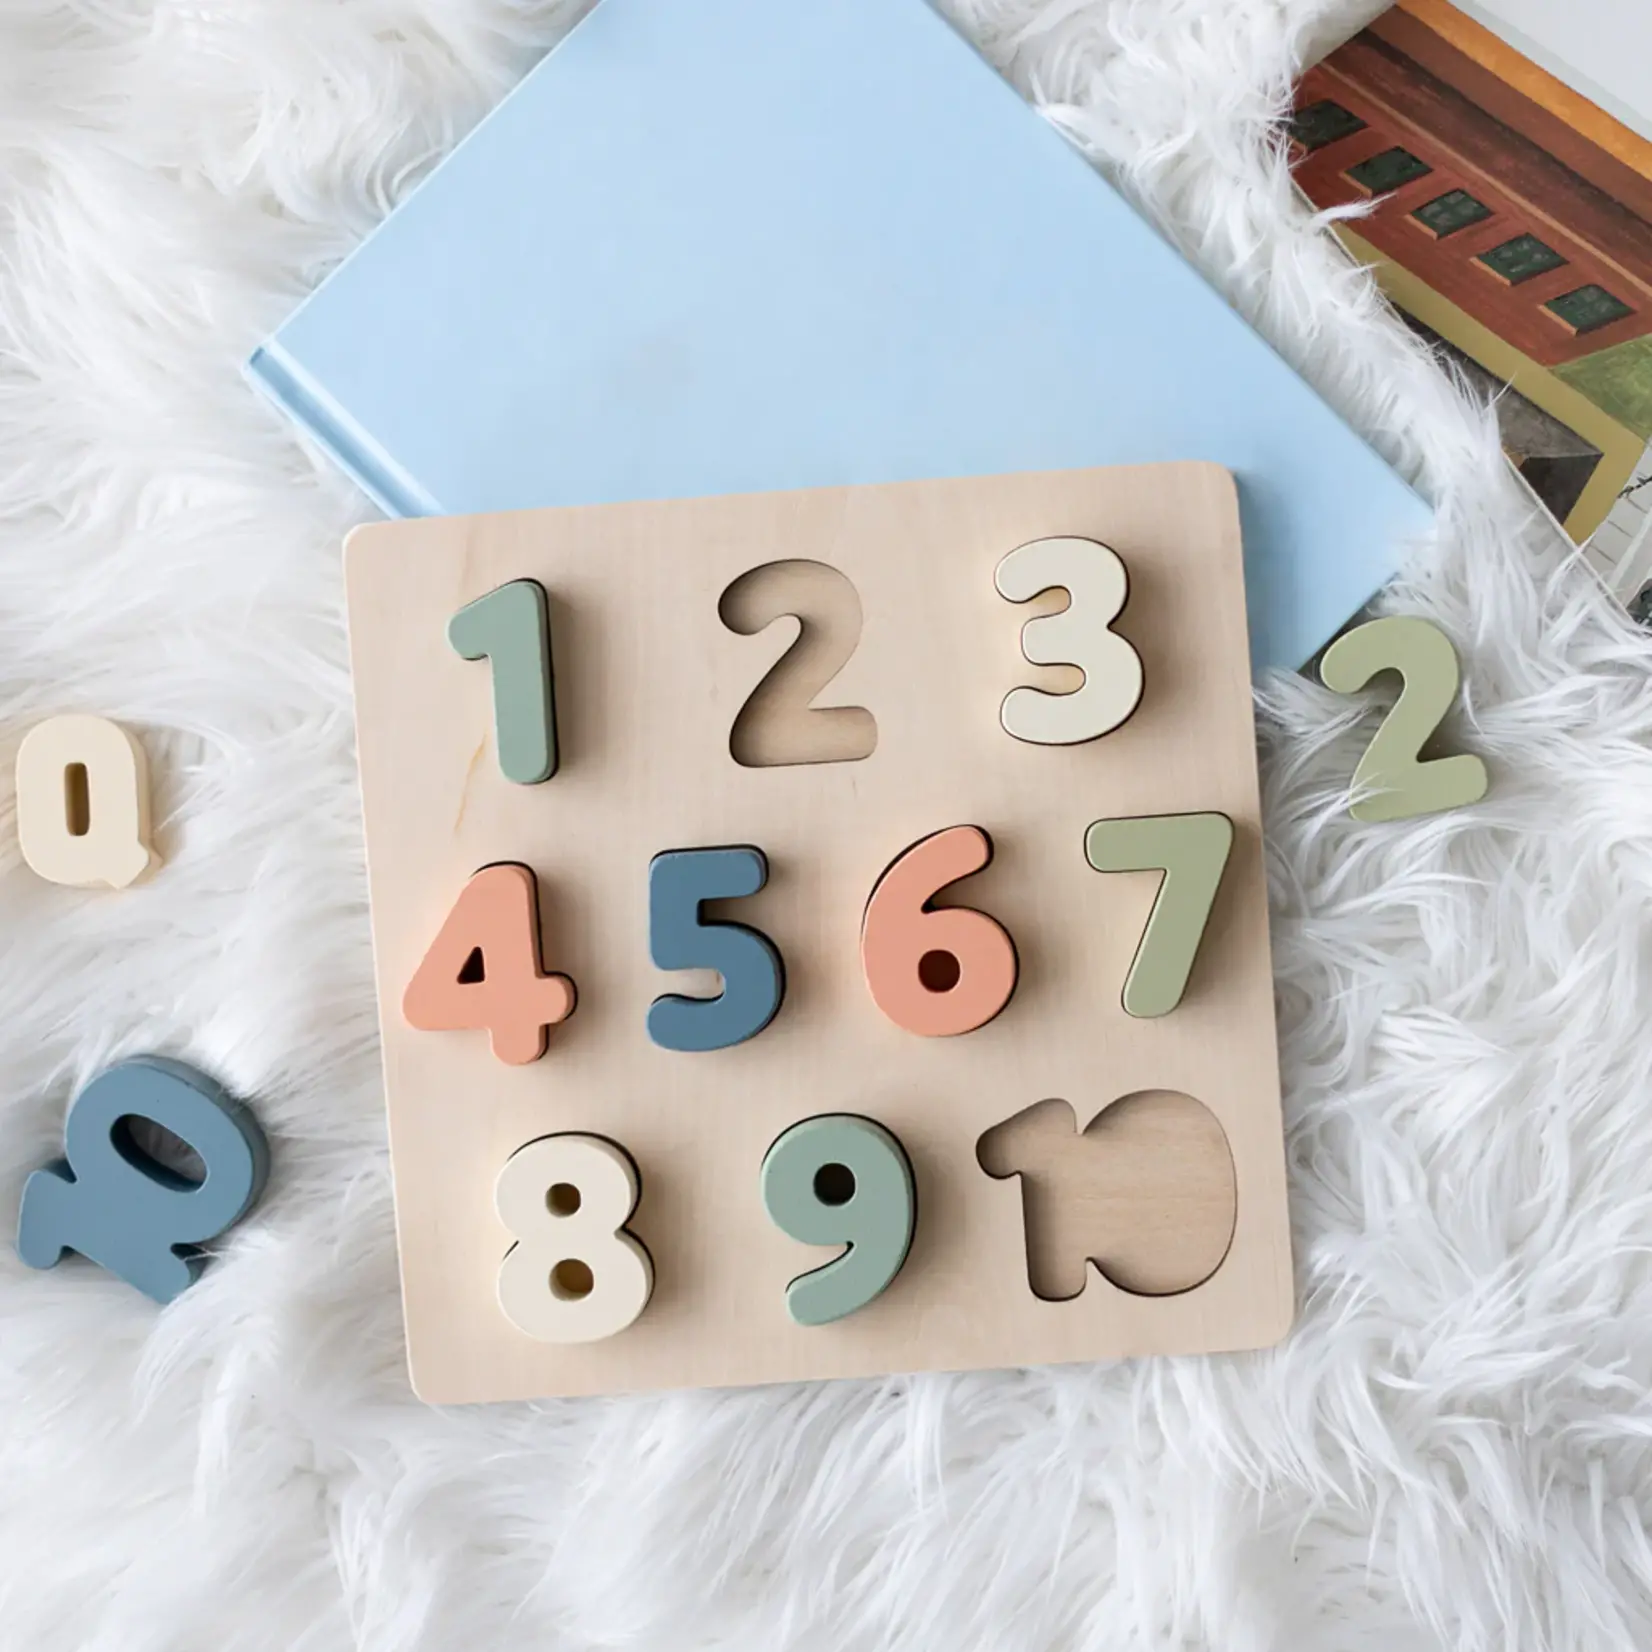 Pearhead PEARHEAD WOODEN NUMBERS PUZZLE